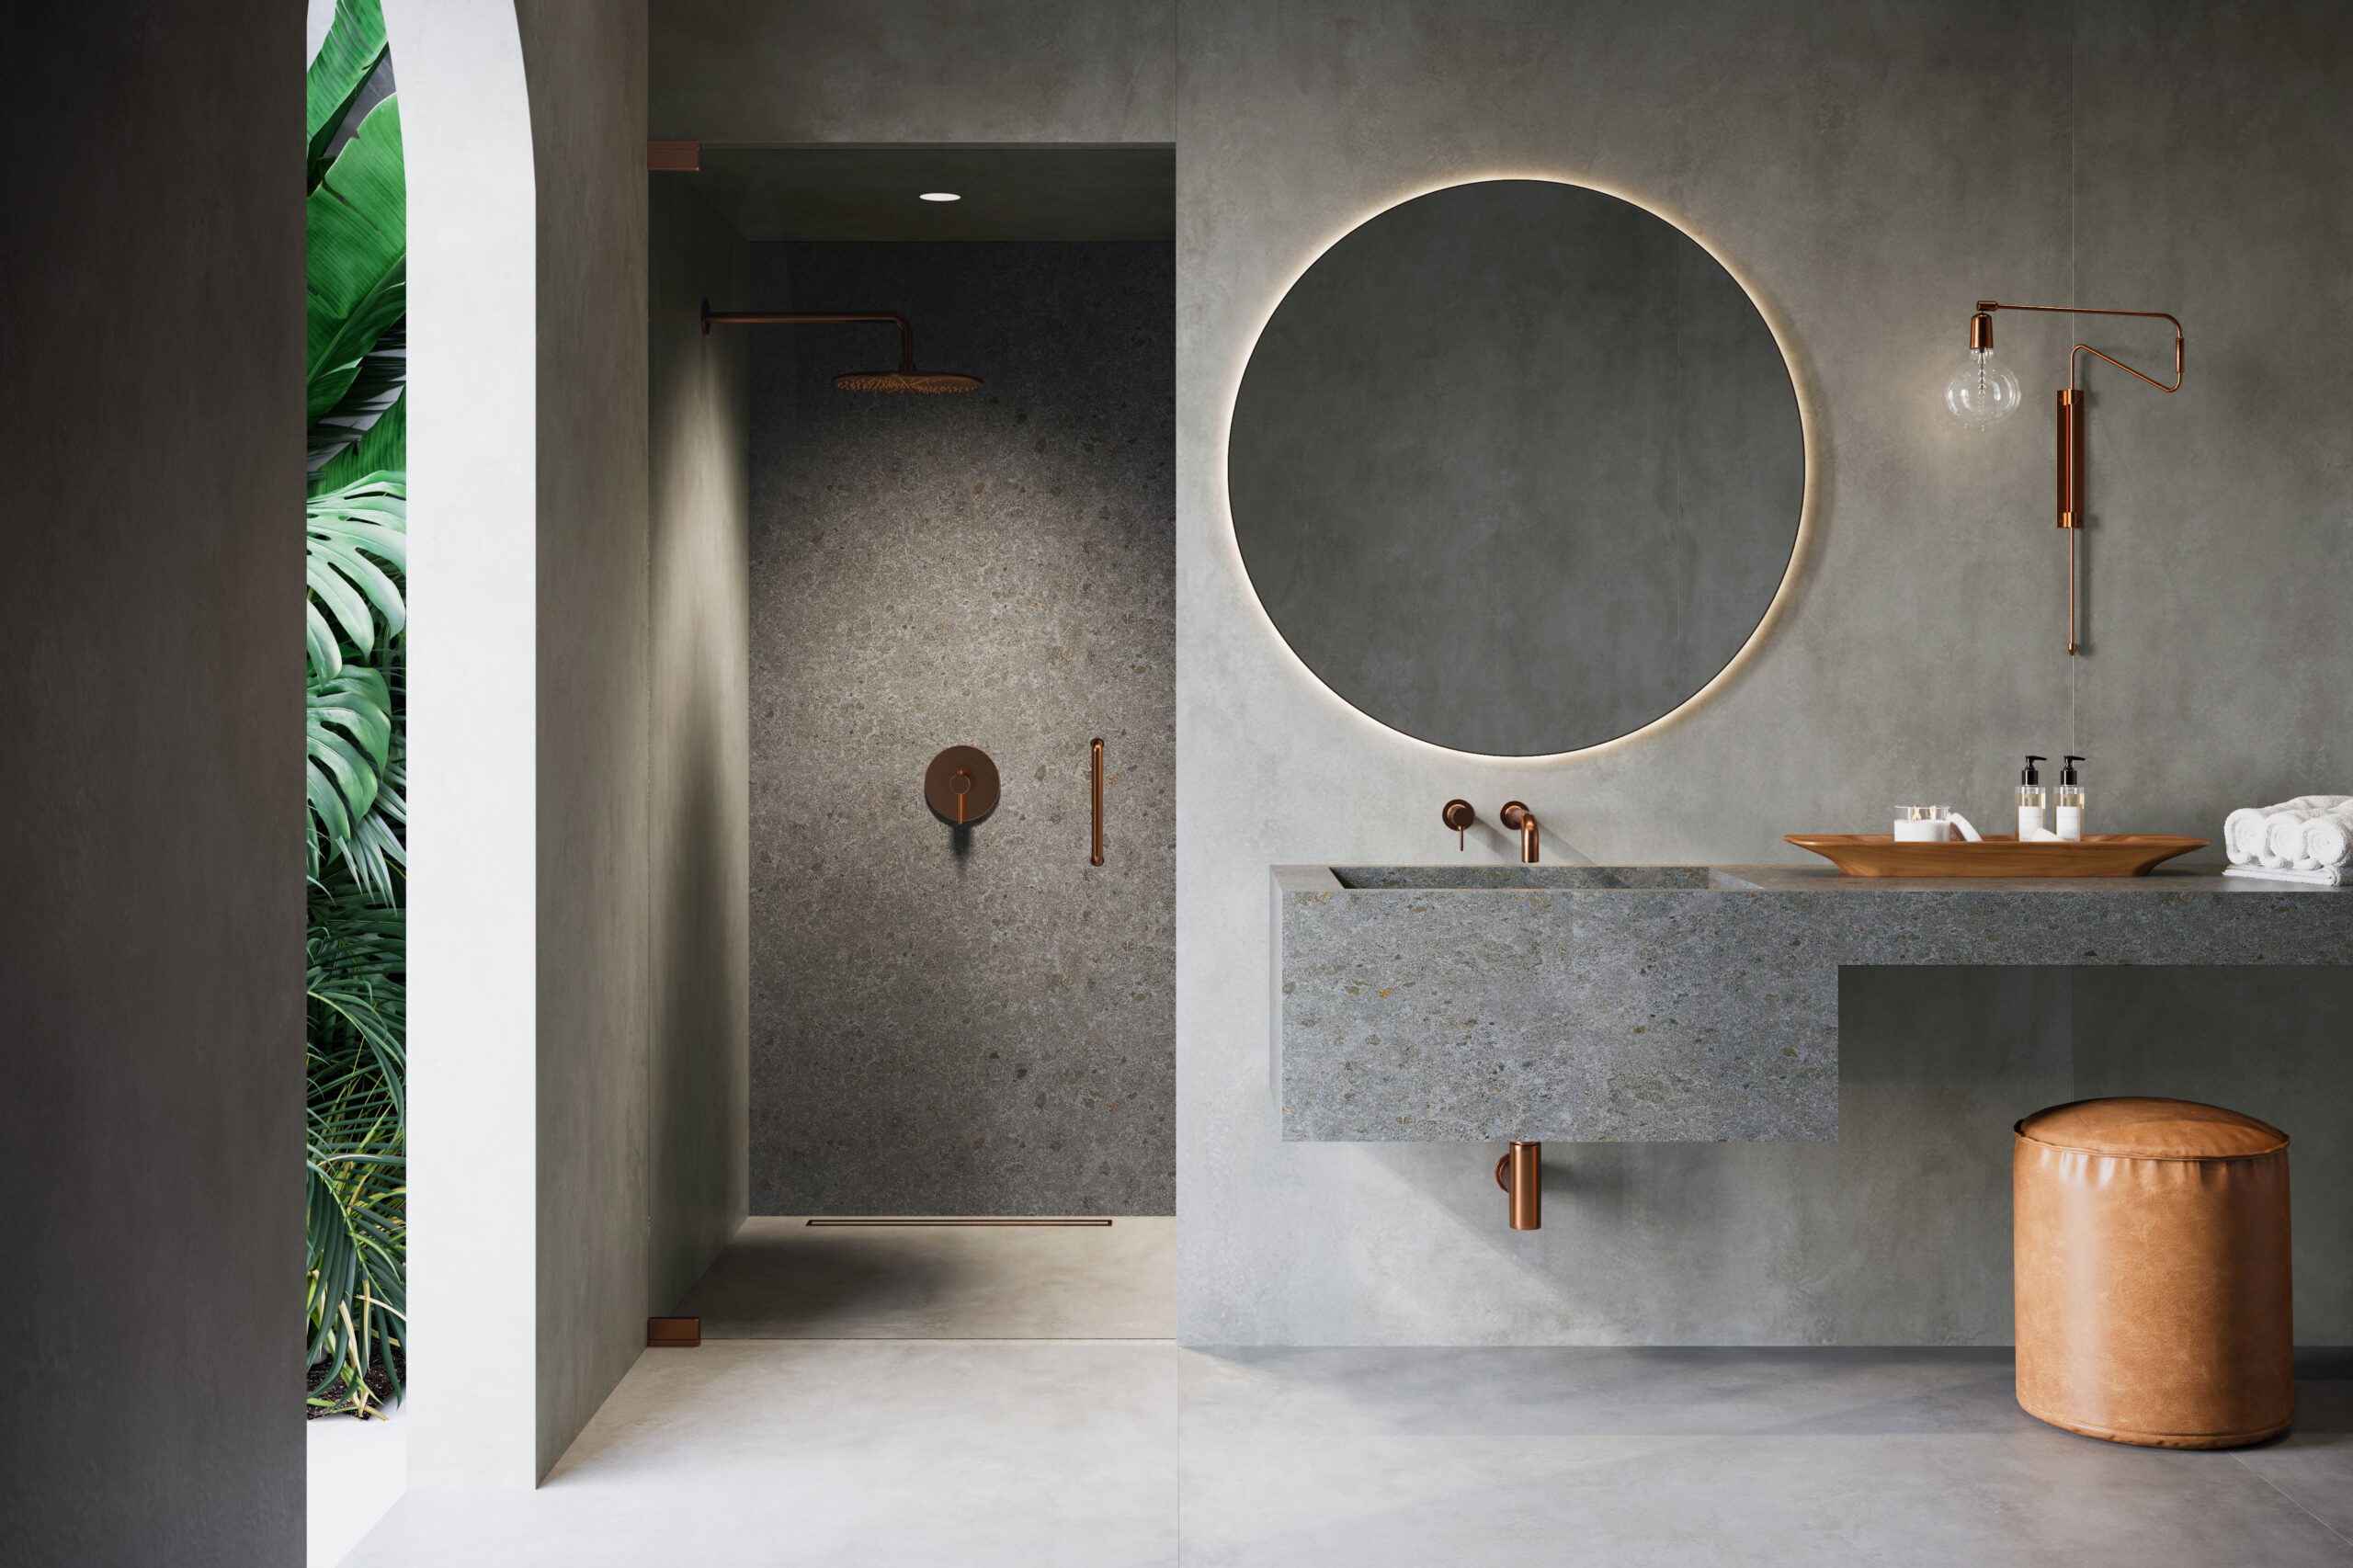 Finding the Perfect Hardware Finish for Your Bathroom Design